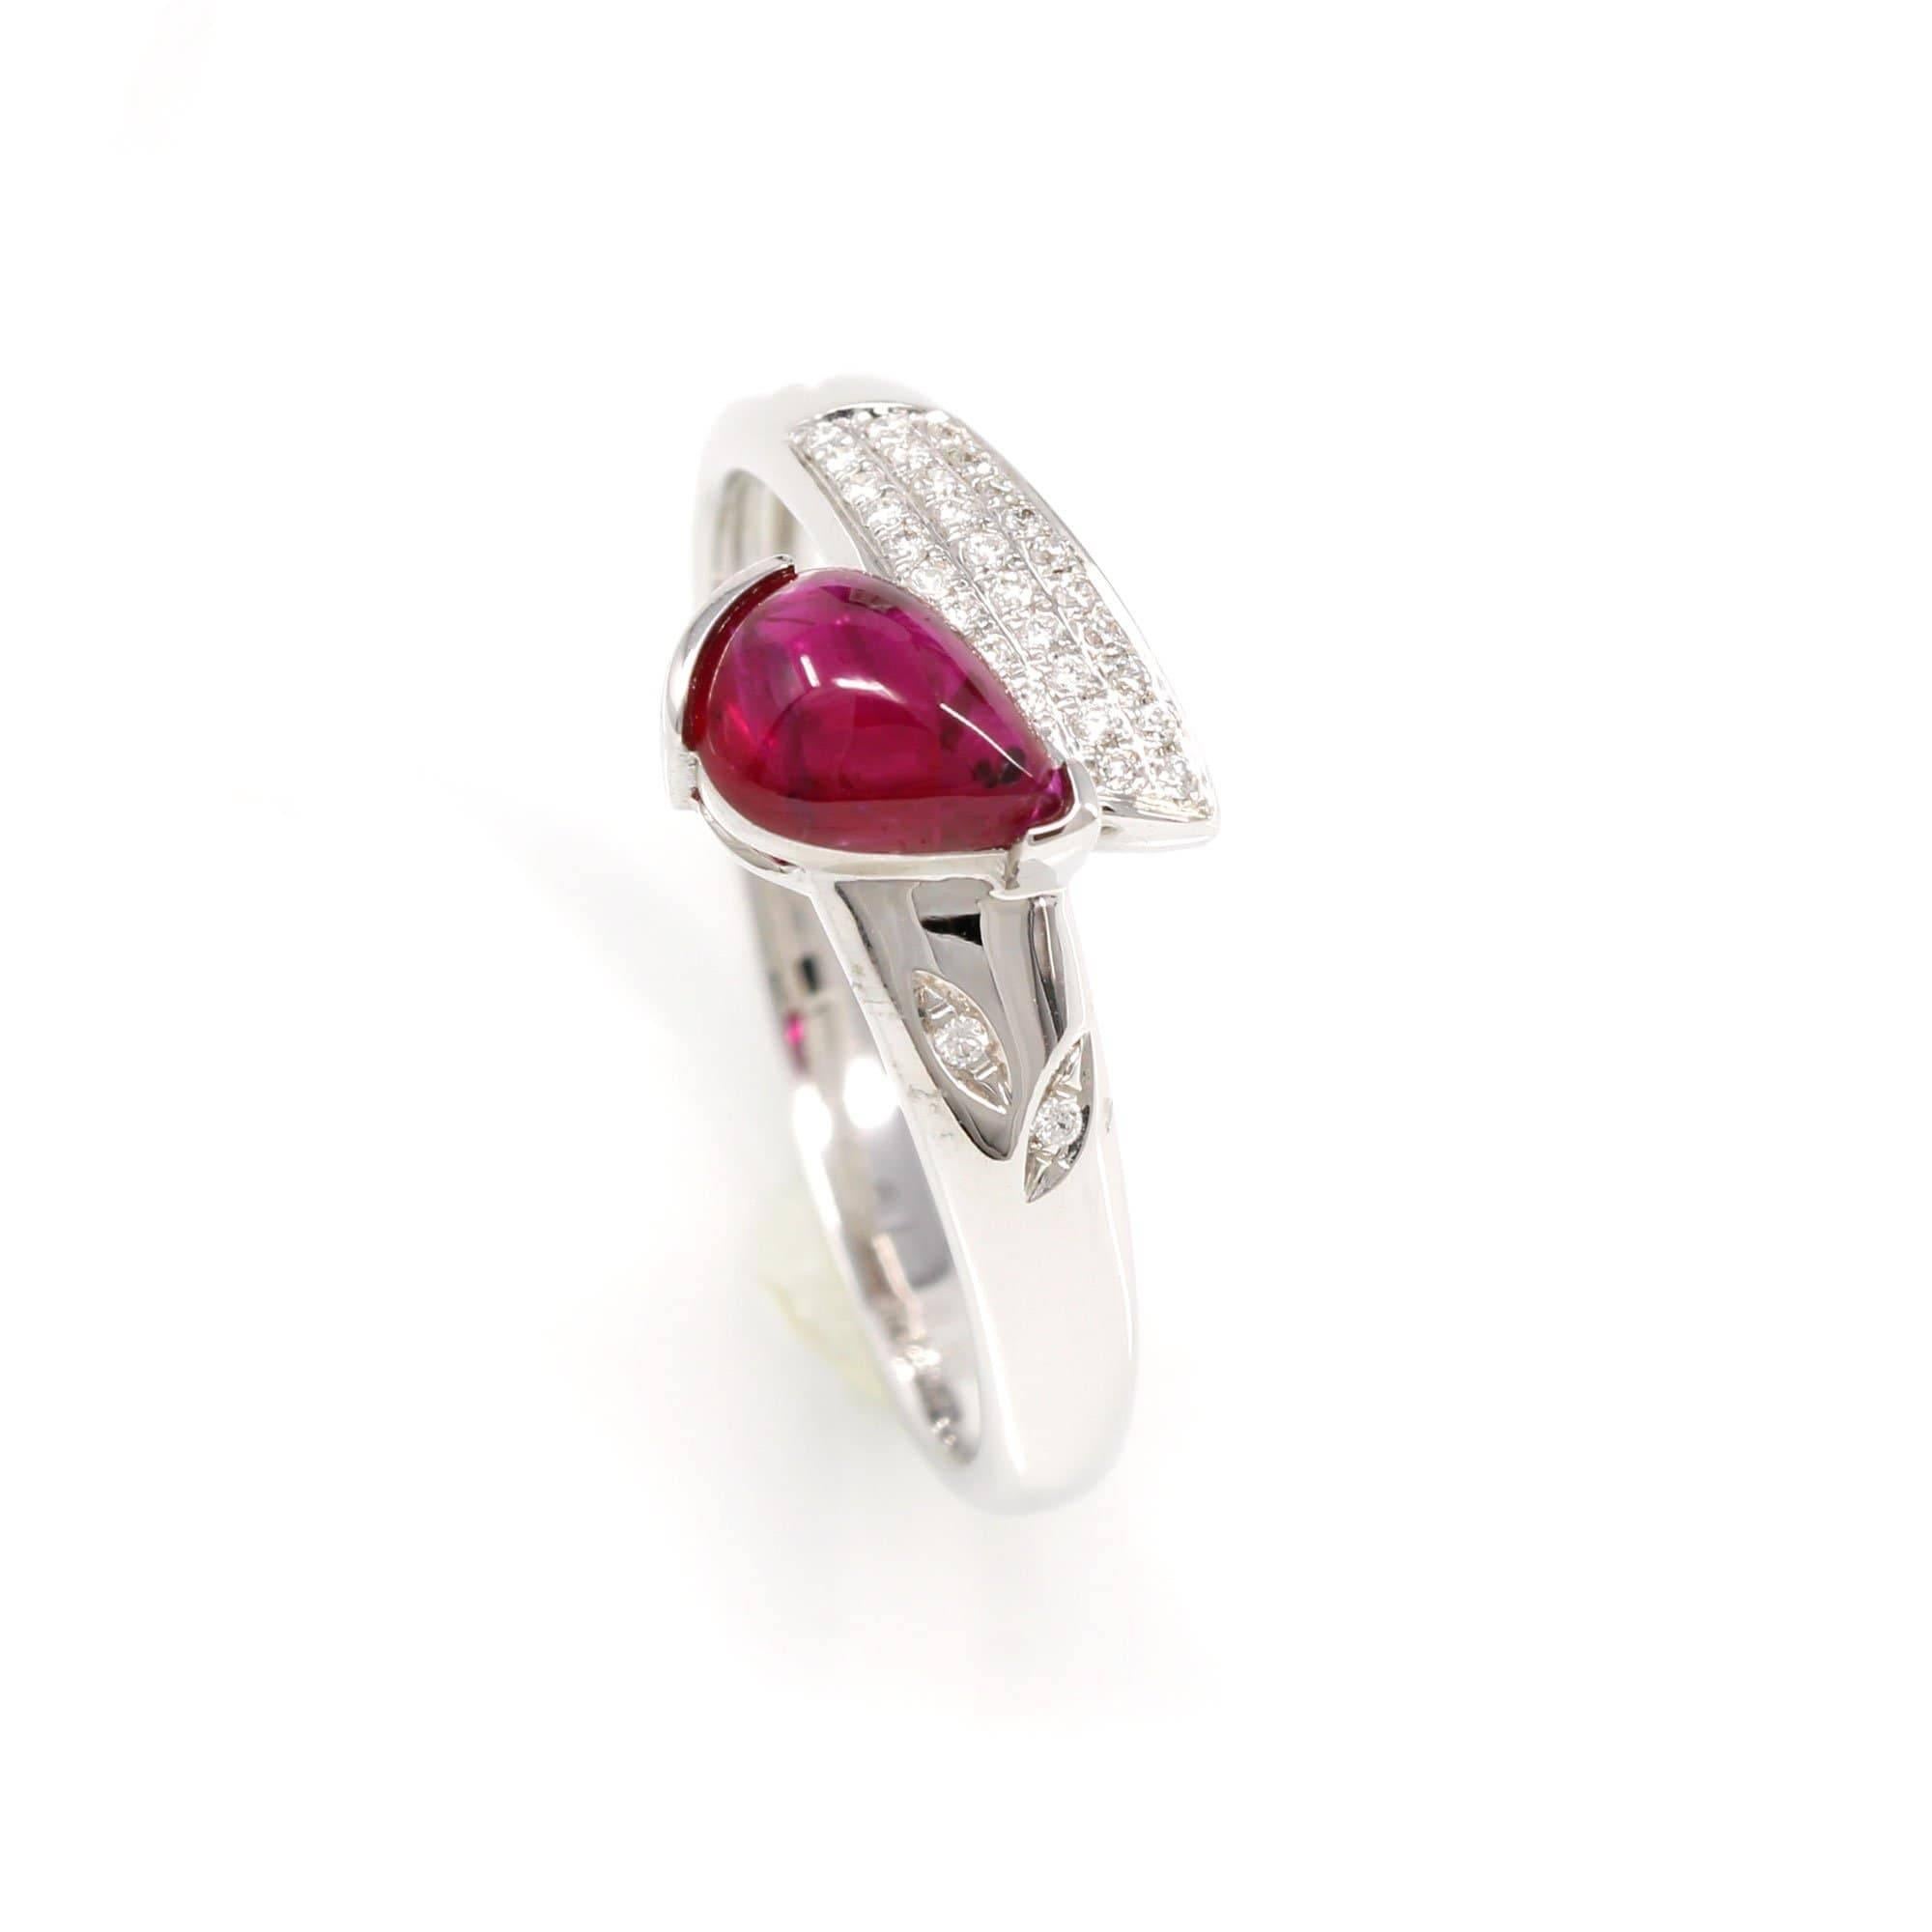 * Details--- This ring features a round natural Sri Lanka 0.86ct Ruby. The design is simplistic yet elegant. The ring is very exquisite with diamonds. Baikalla artisans are dedicated to combining beautiful gemstones with modern-day luxury. The